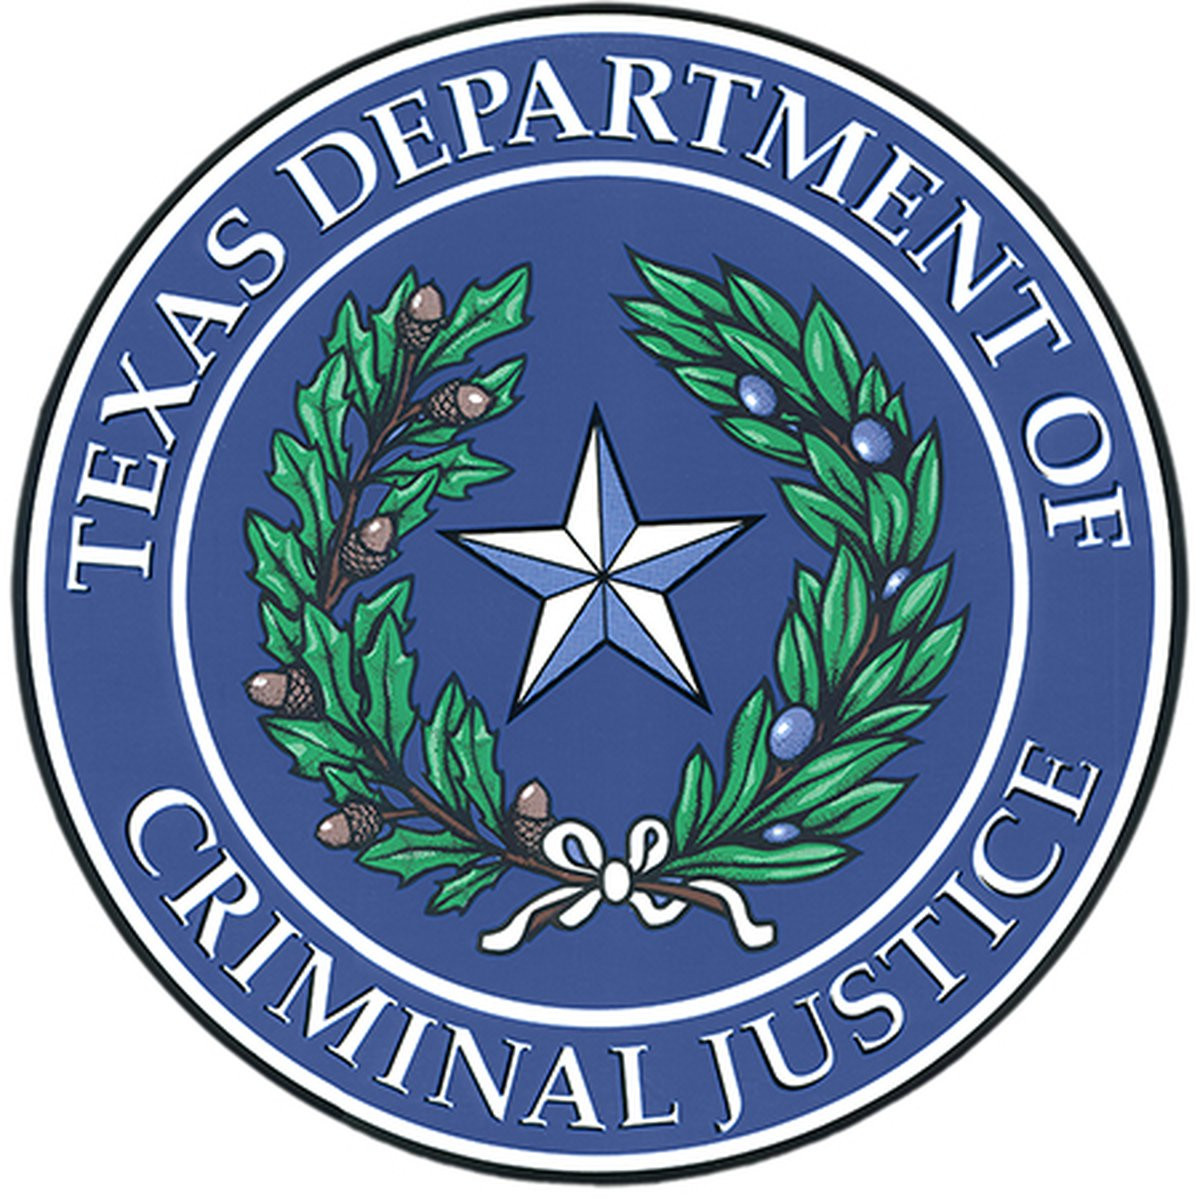 The Texas Department of Criminal Justice logo prominently displays the renowned Texas Seal with a dark blue background. The circular emblem encompasses the seal, symbolizing the state's authority and involvement in criminal justice matters. At the top of the circle, the words "Texas Department Of" are presented, followed by "Criminal Justice" at the bottom. This logo represents the department's role and responsibility in maintaining public safety, administering corrections, and upholding the criminal justice system in the state of Texas.